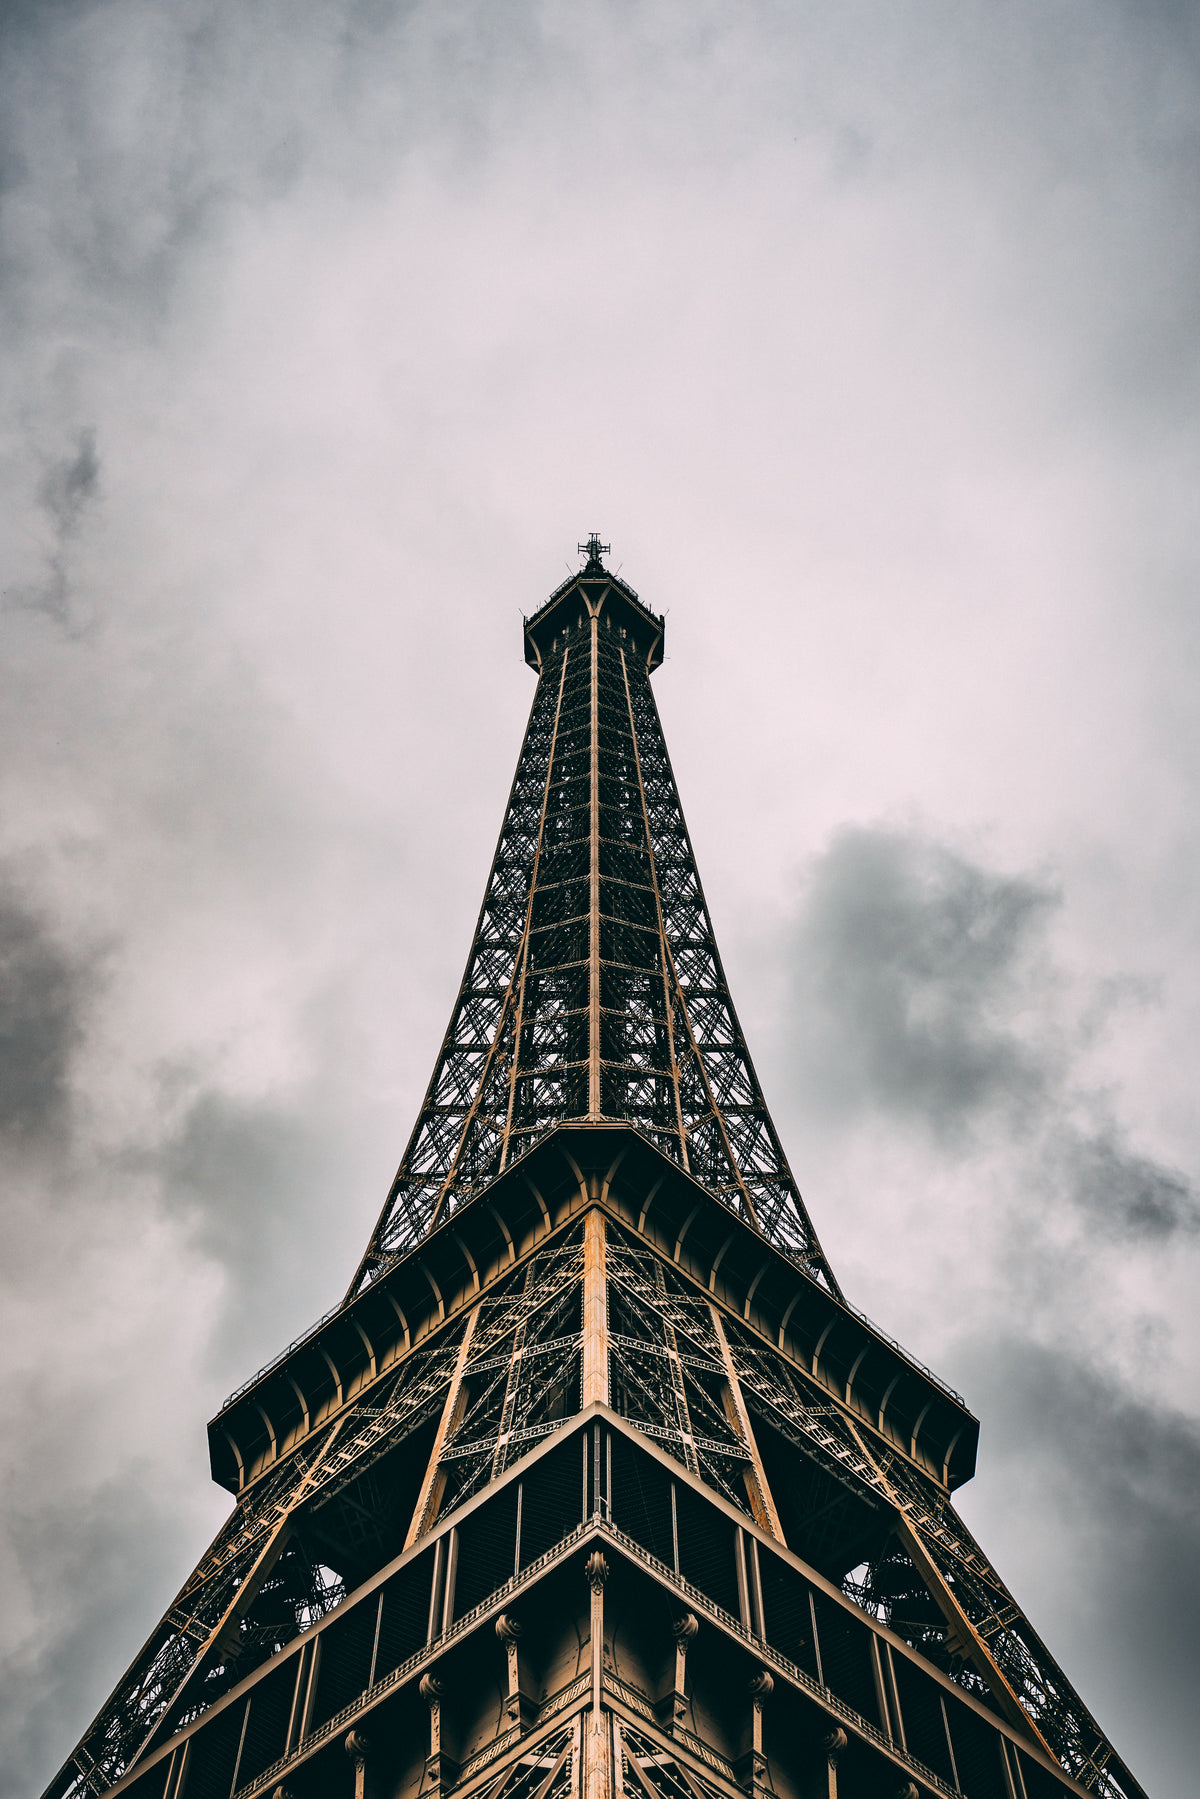 Eiffel Tower Images [HD]- Download Eiffel Tower Pics for Free